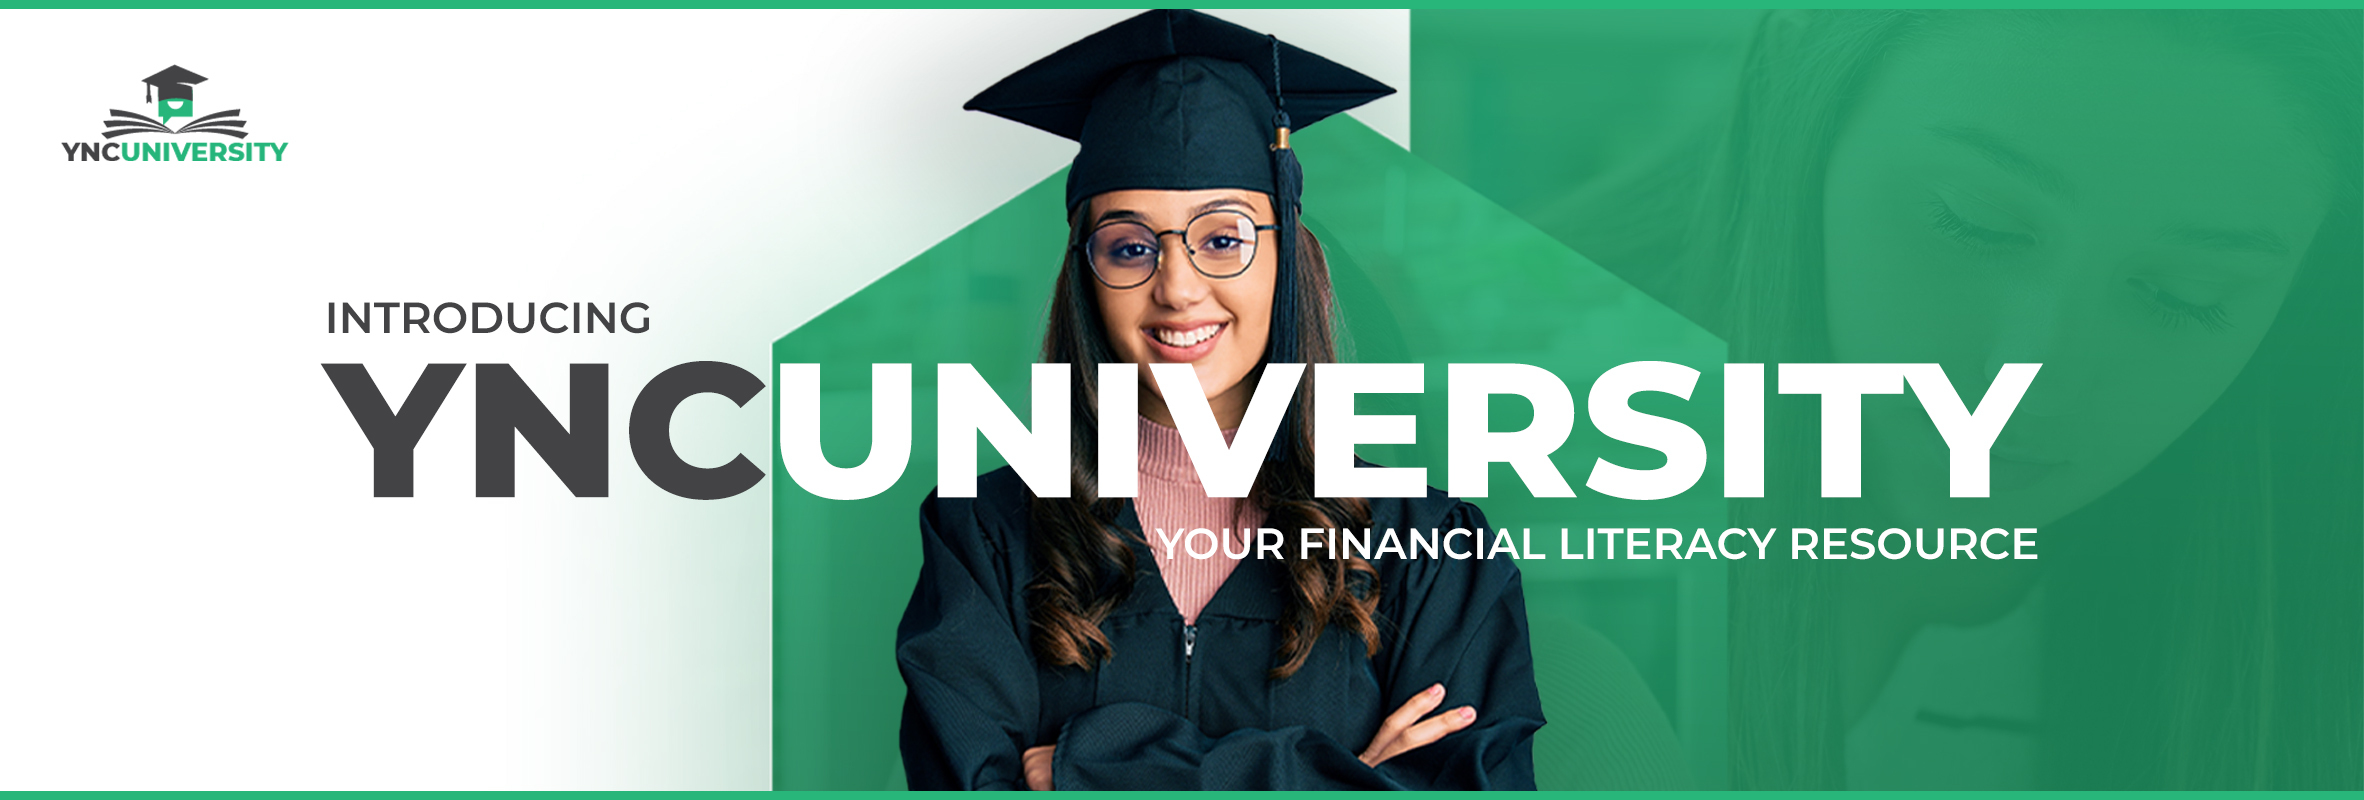 Woman wearing a graduation cap and gown stands happily with her arms crossed. Text reads "Introducing YNCUniversity. Your financial literacy resource."